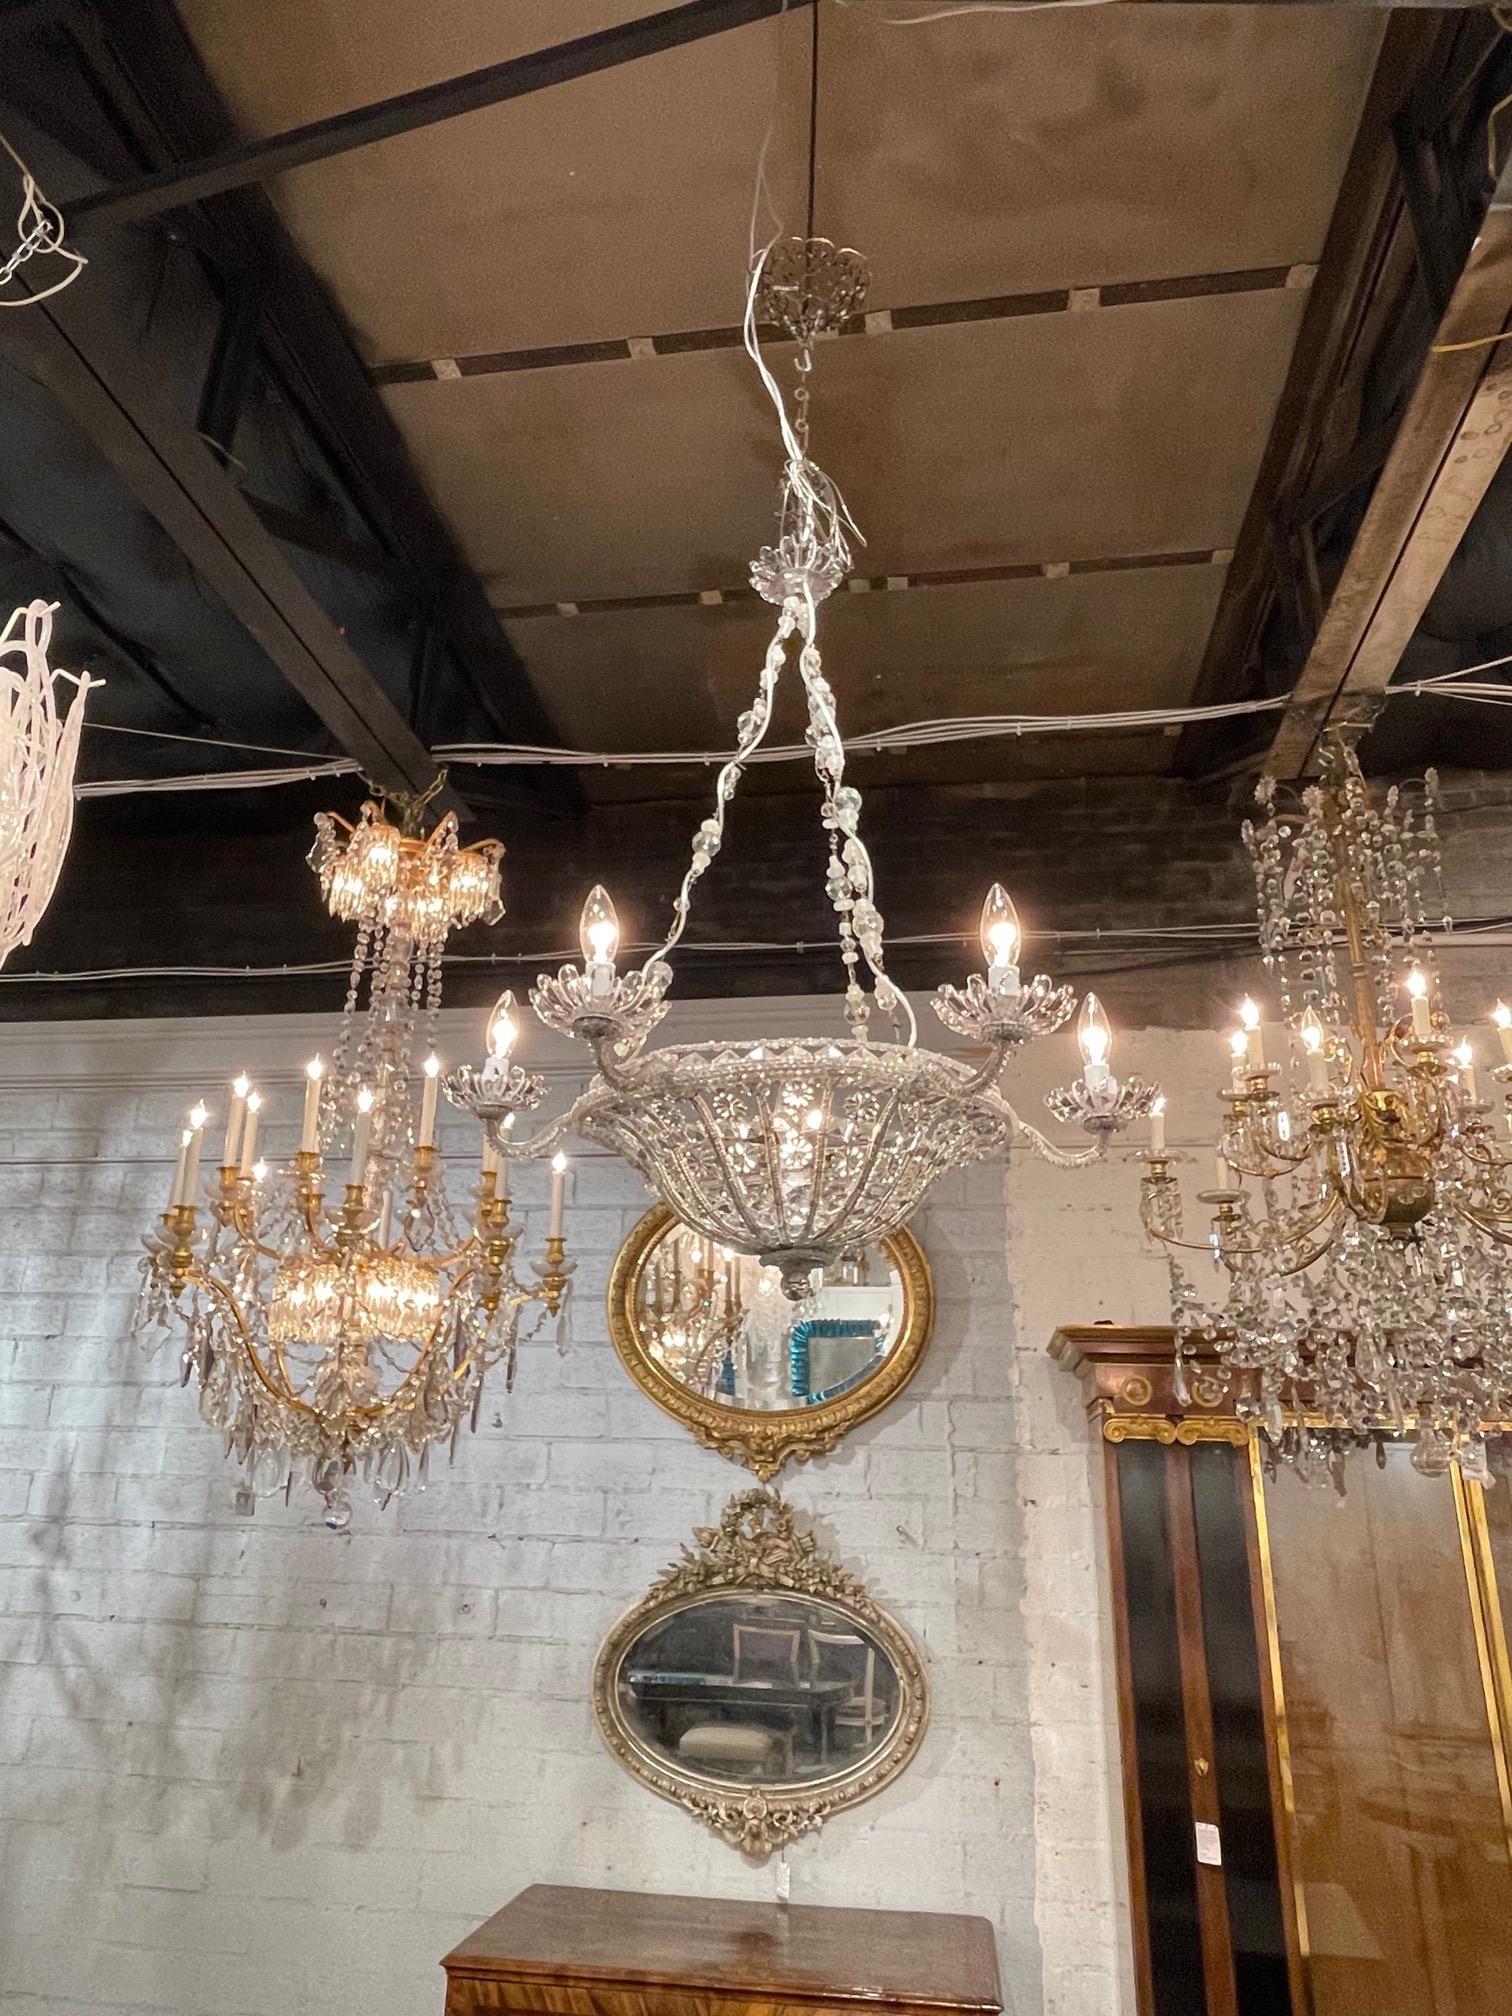 Lovely 19th century Italian crystal beaded basket chandelier with 7 lights. Beautiful floral beads along with other decorative images. So pretty!